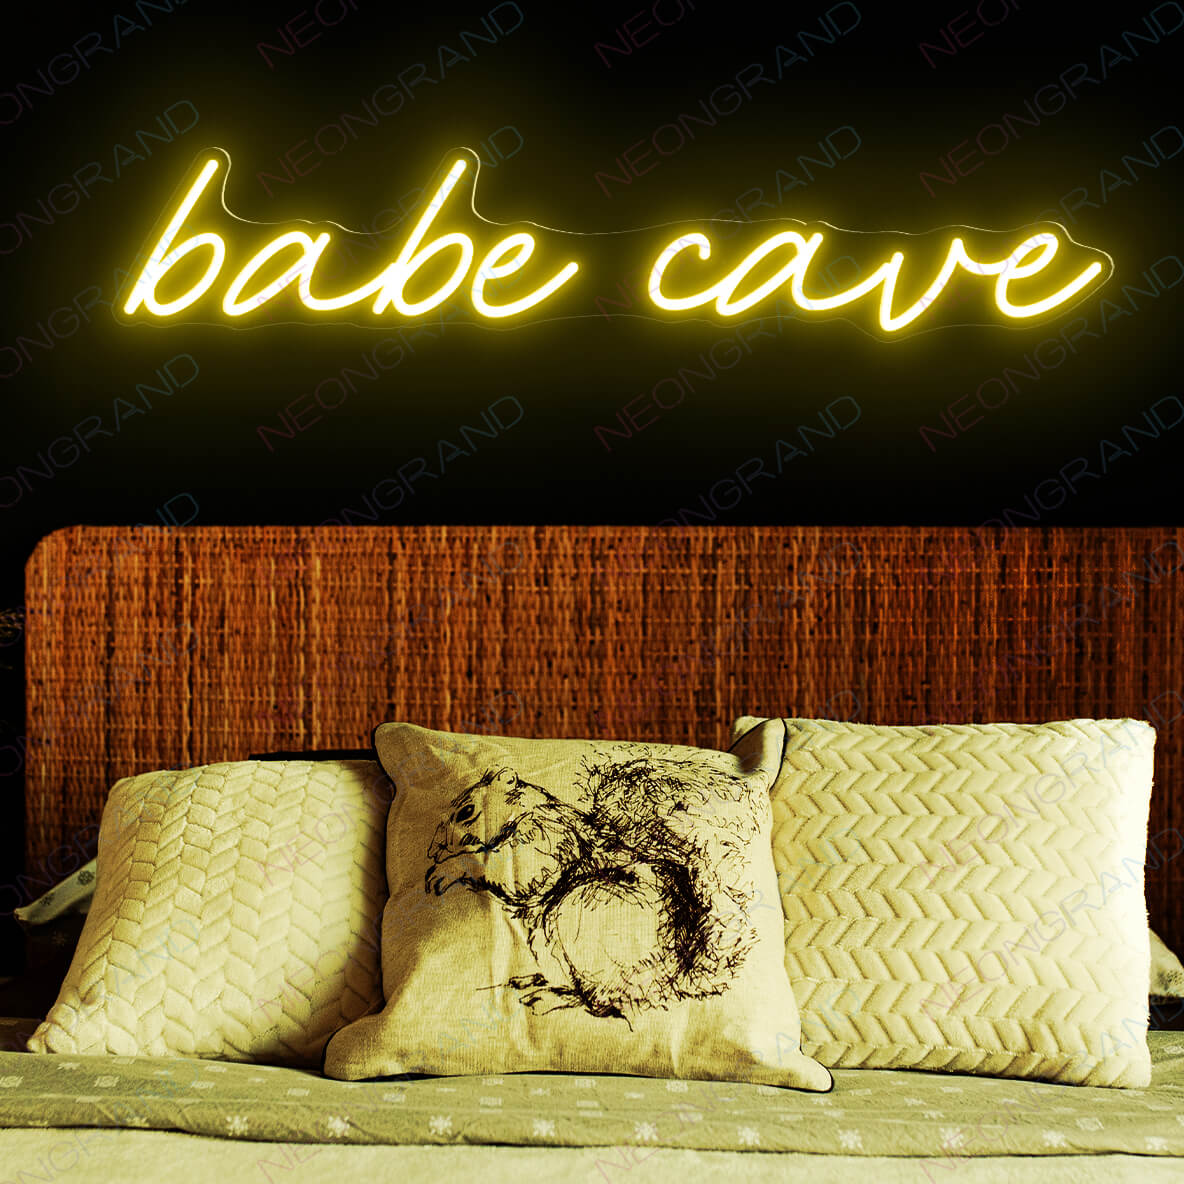 Babe Cave Neon Sign Led Light yellow